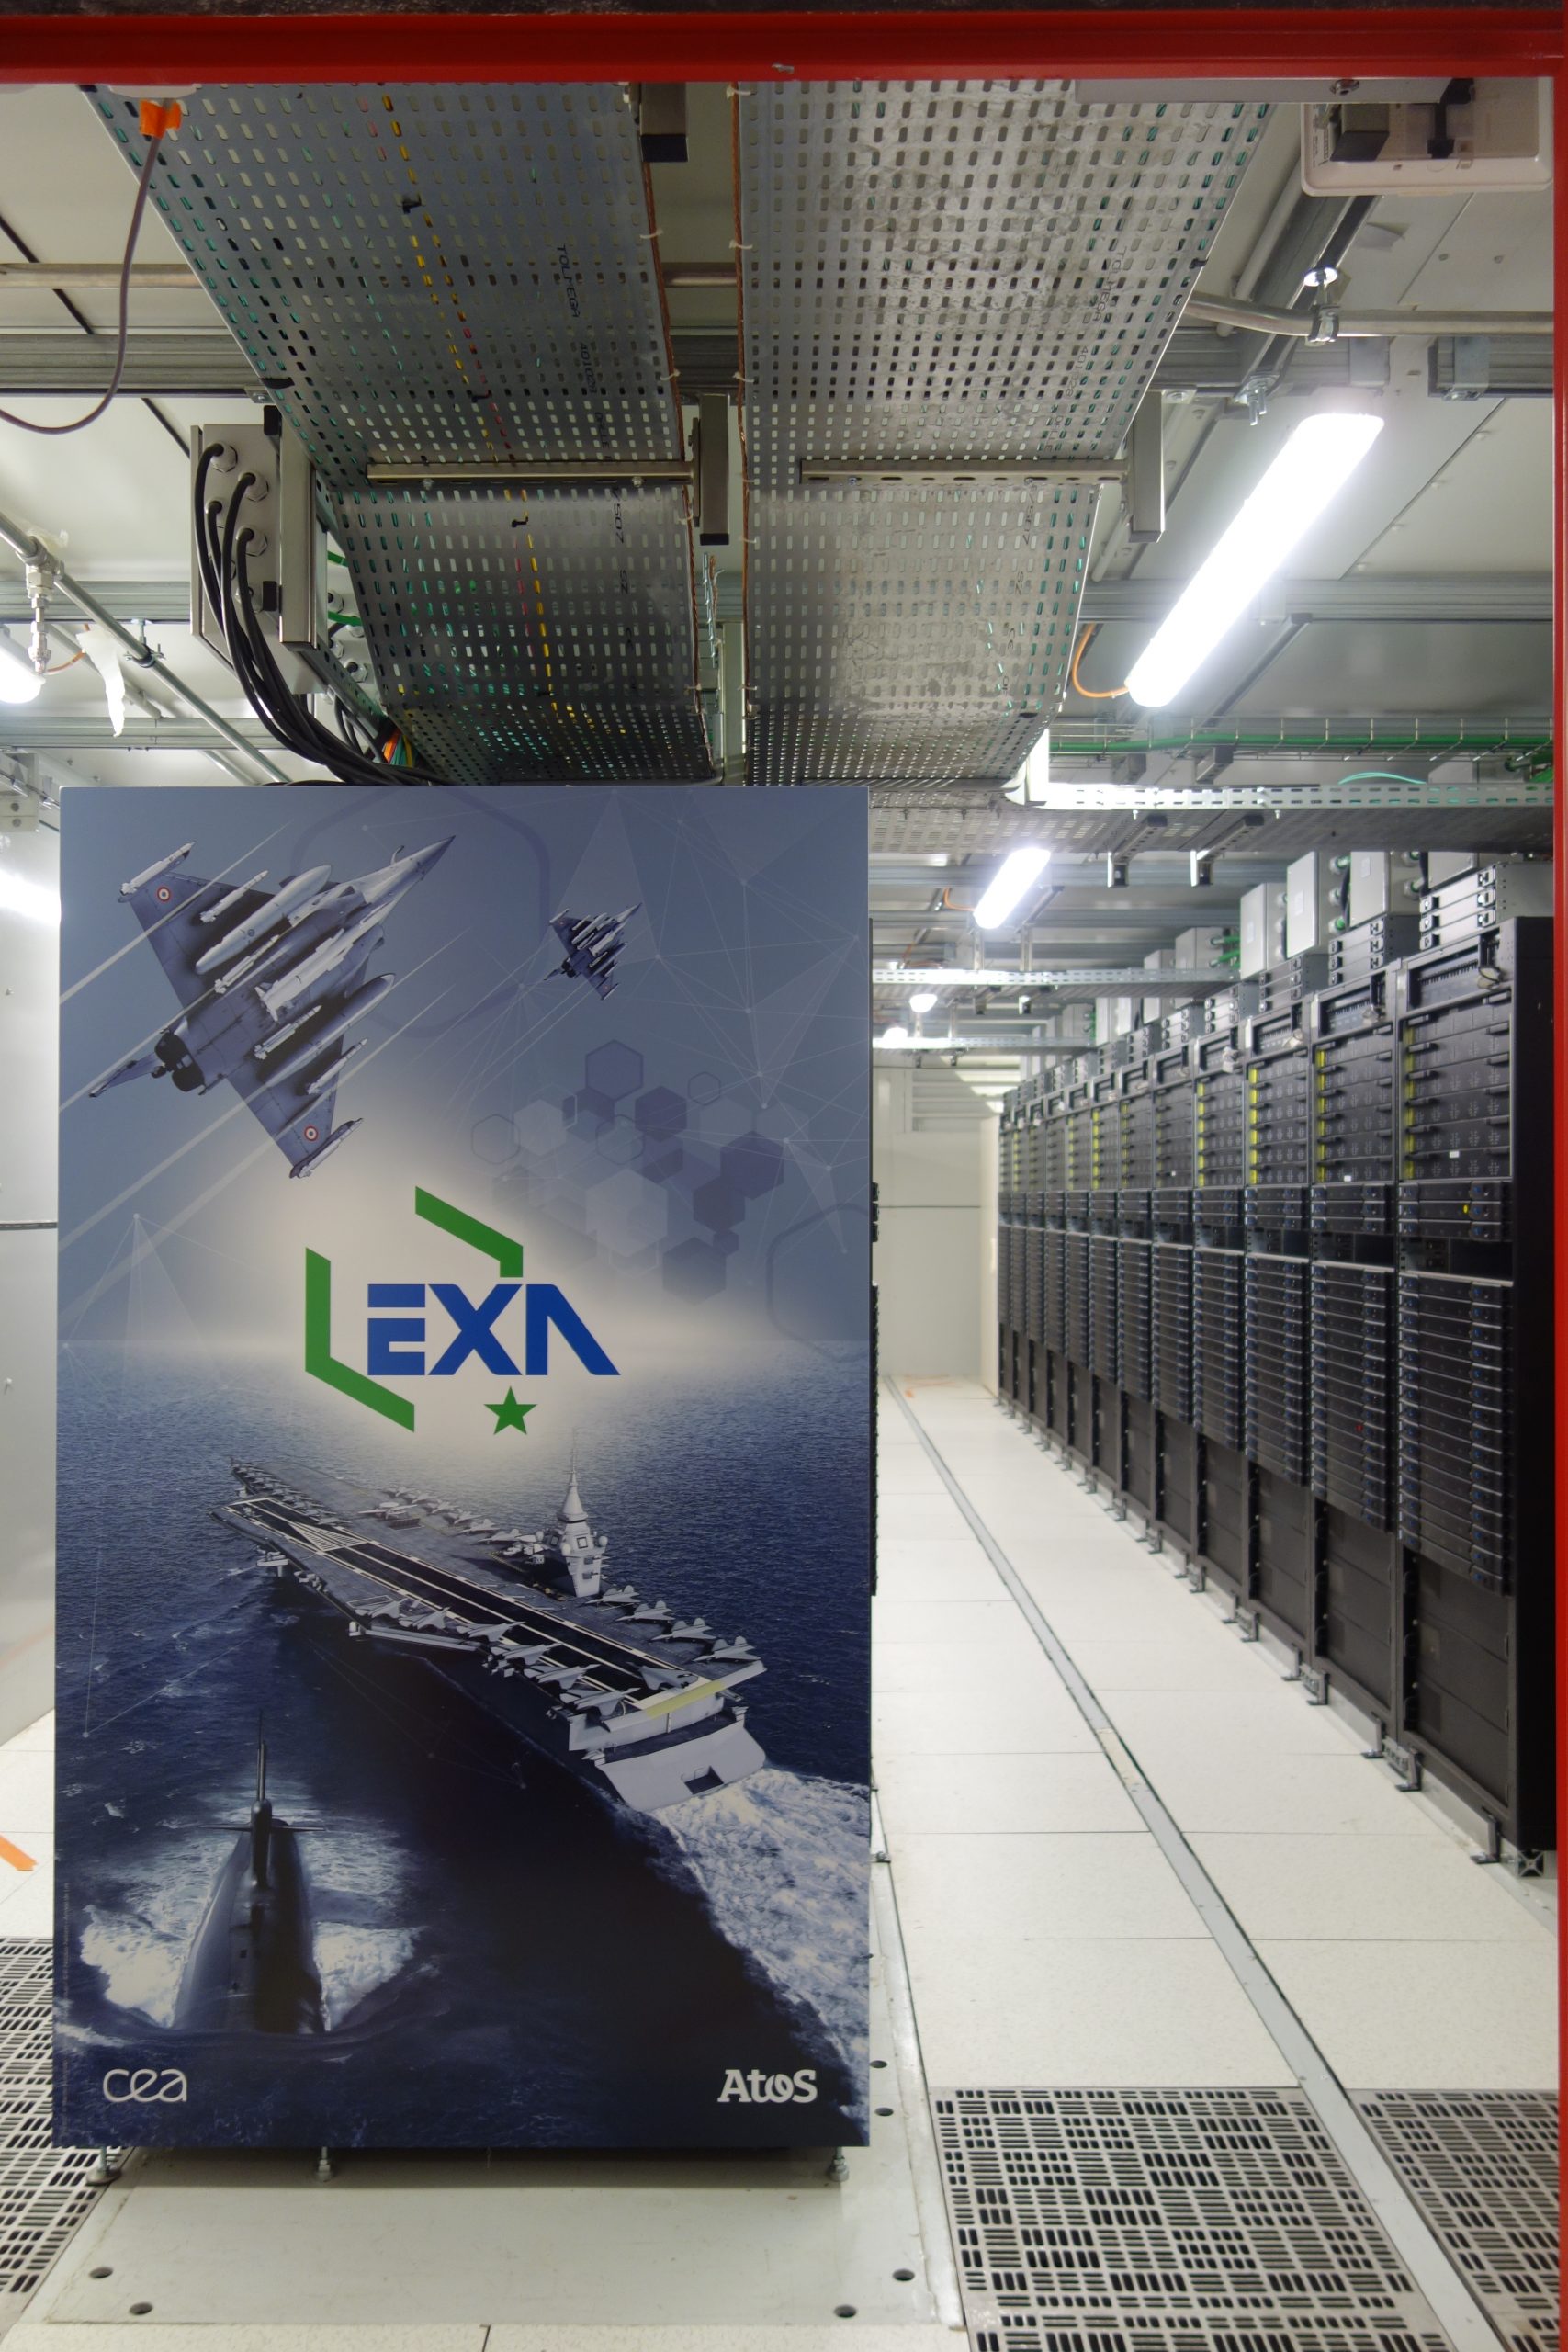 Atos and the CEA launch EXA1 supercomputer – the most powerful & energy-efficient HPC system in Europe based on General Purpose CPUs